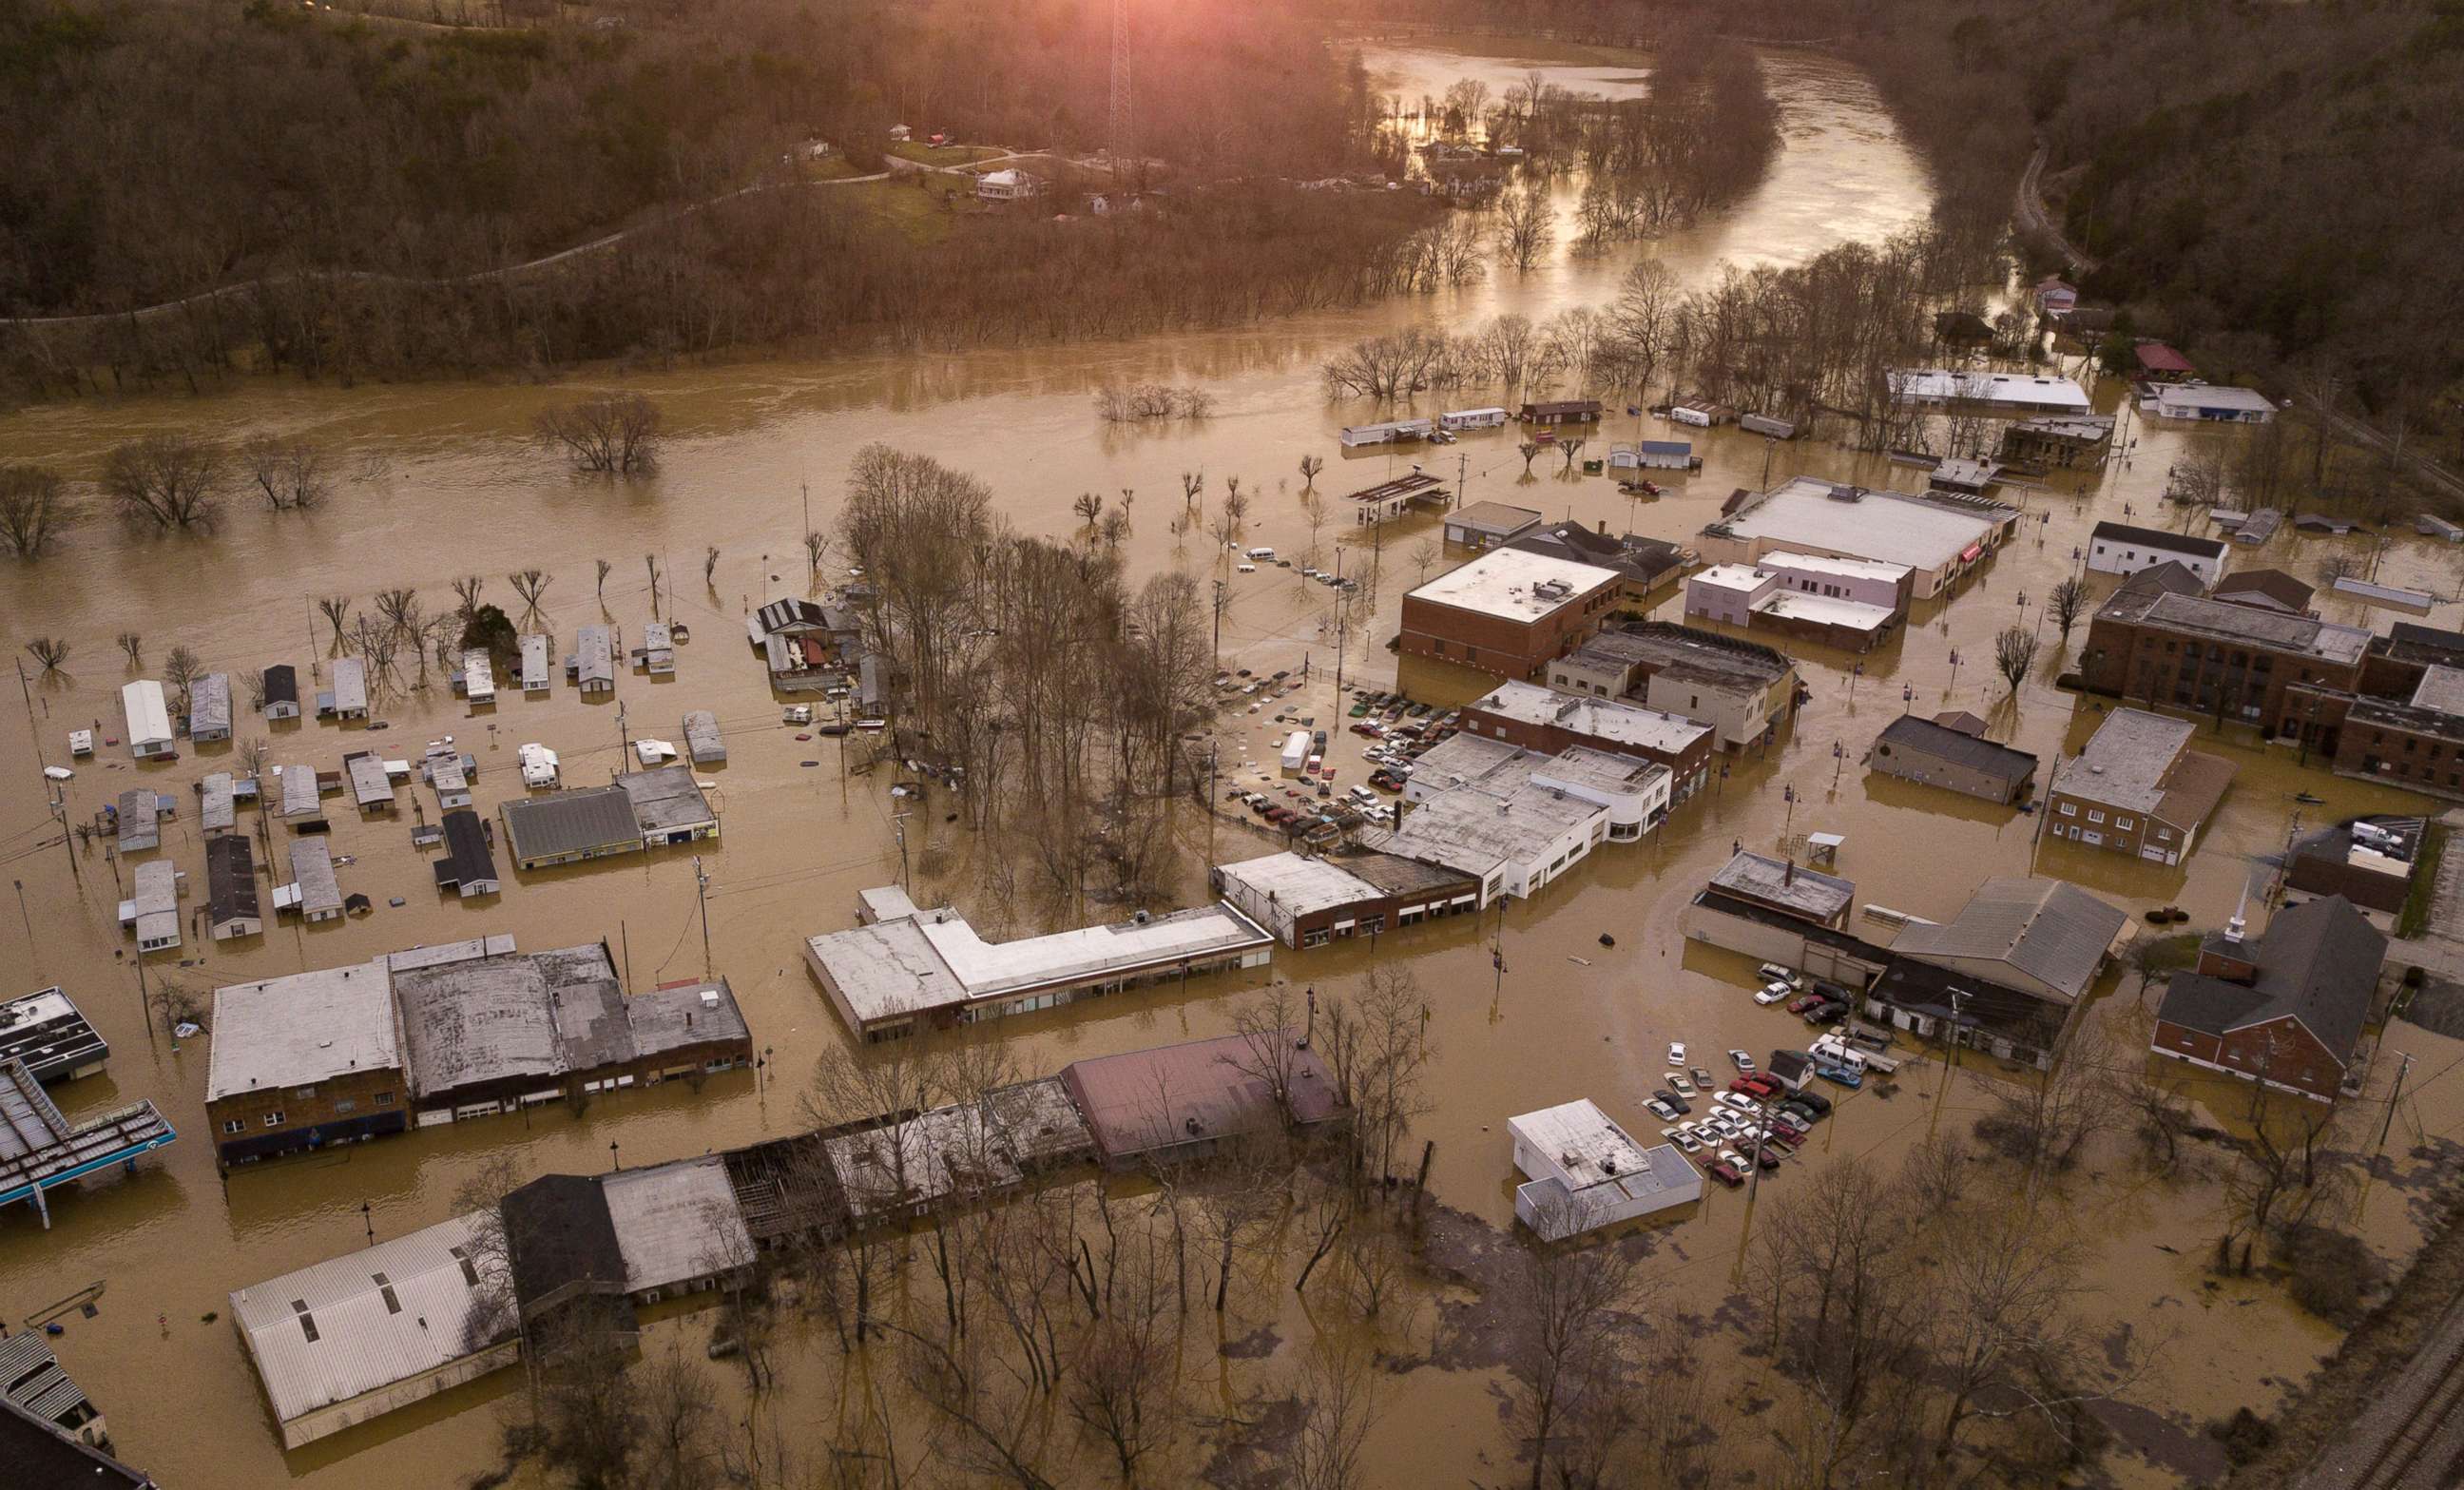 PHOTO: A view from above shows flooding in downtown Beattyville, Ky., March 1, 2021, after heavy rains led to the Kentucky River overflowing and breaking records last seen in 1957.